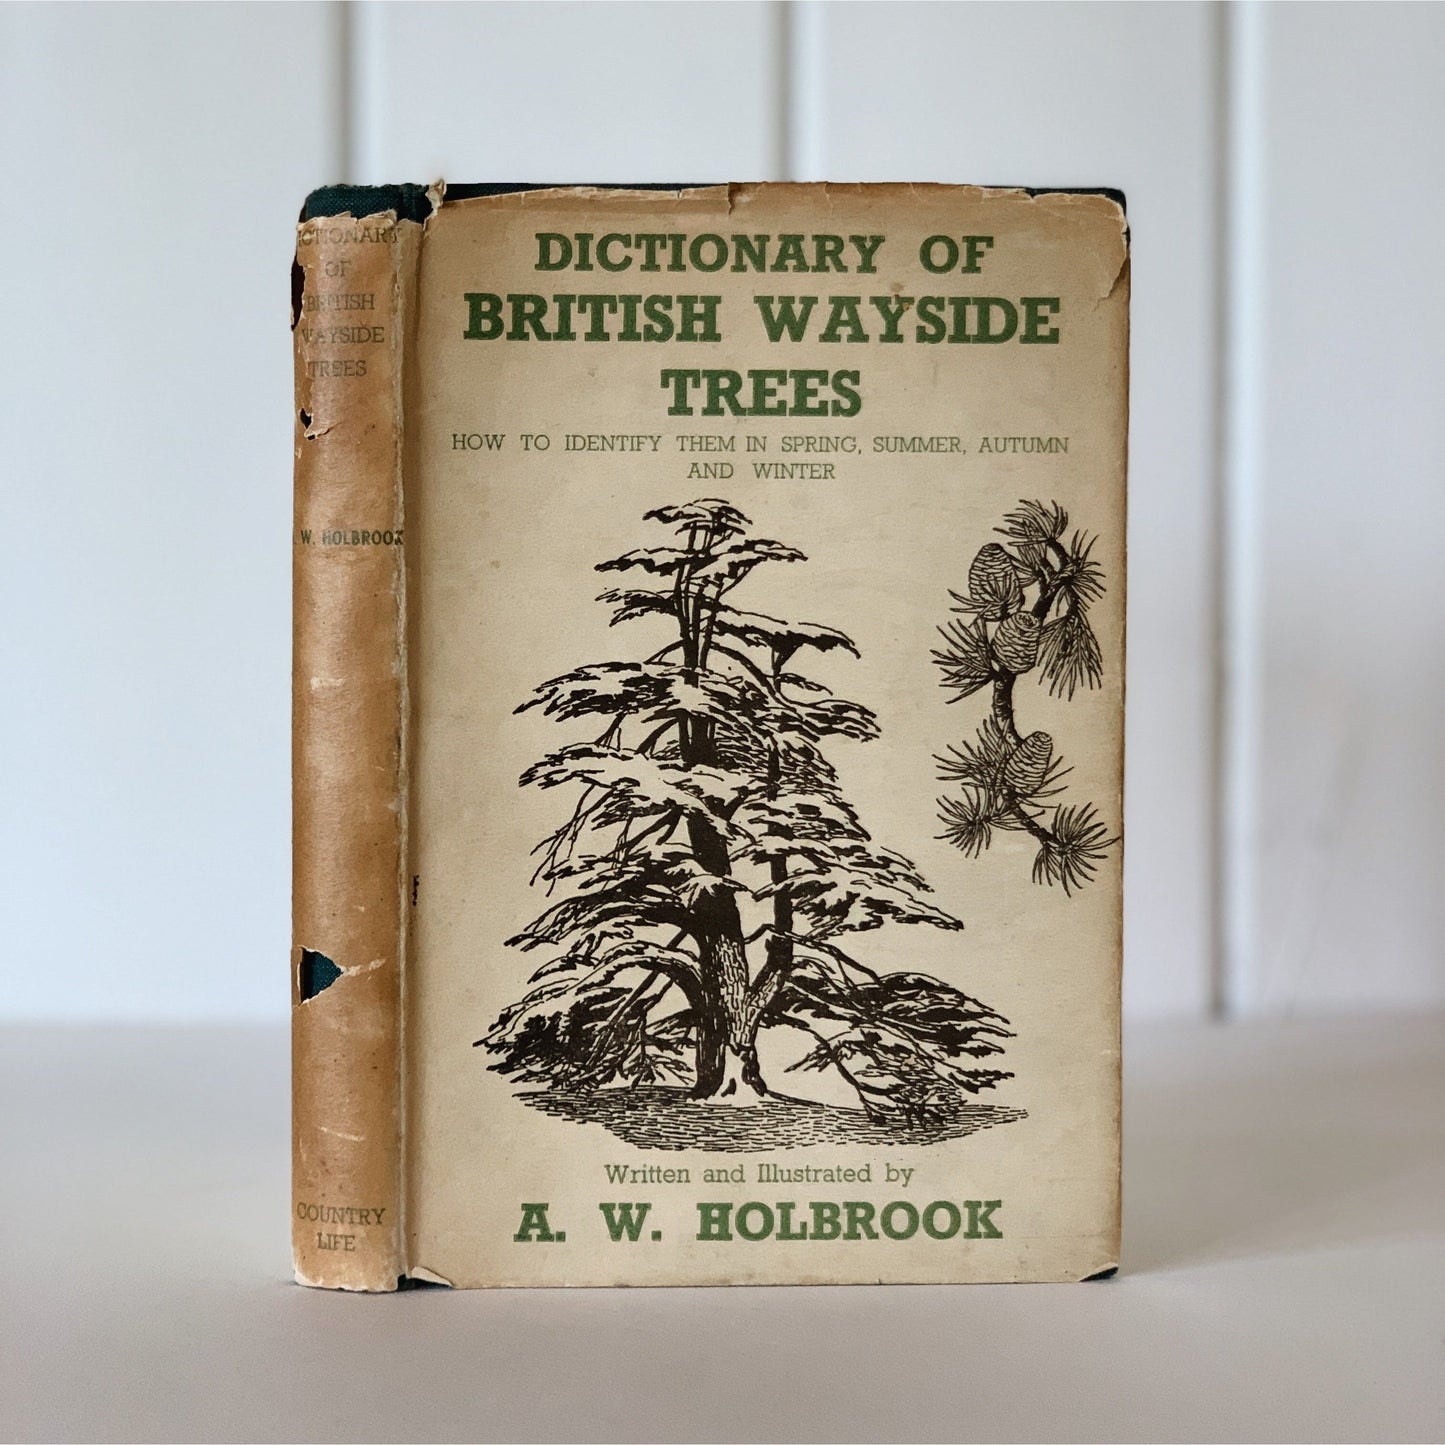 Dictionary of Wayside Trees, 1942, A.W. Holbrook, 2nd edition